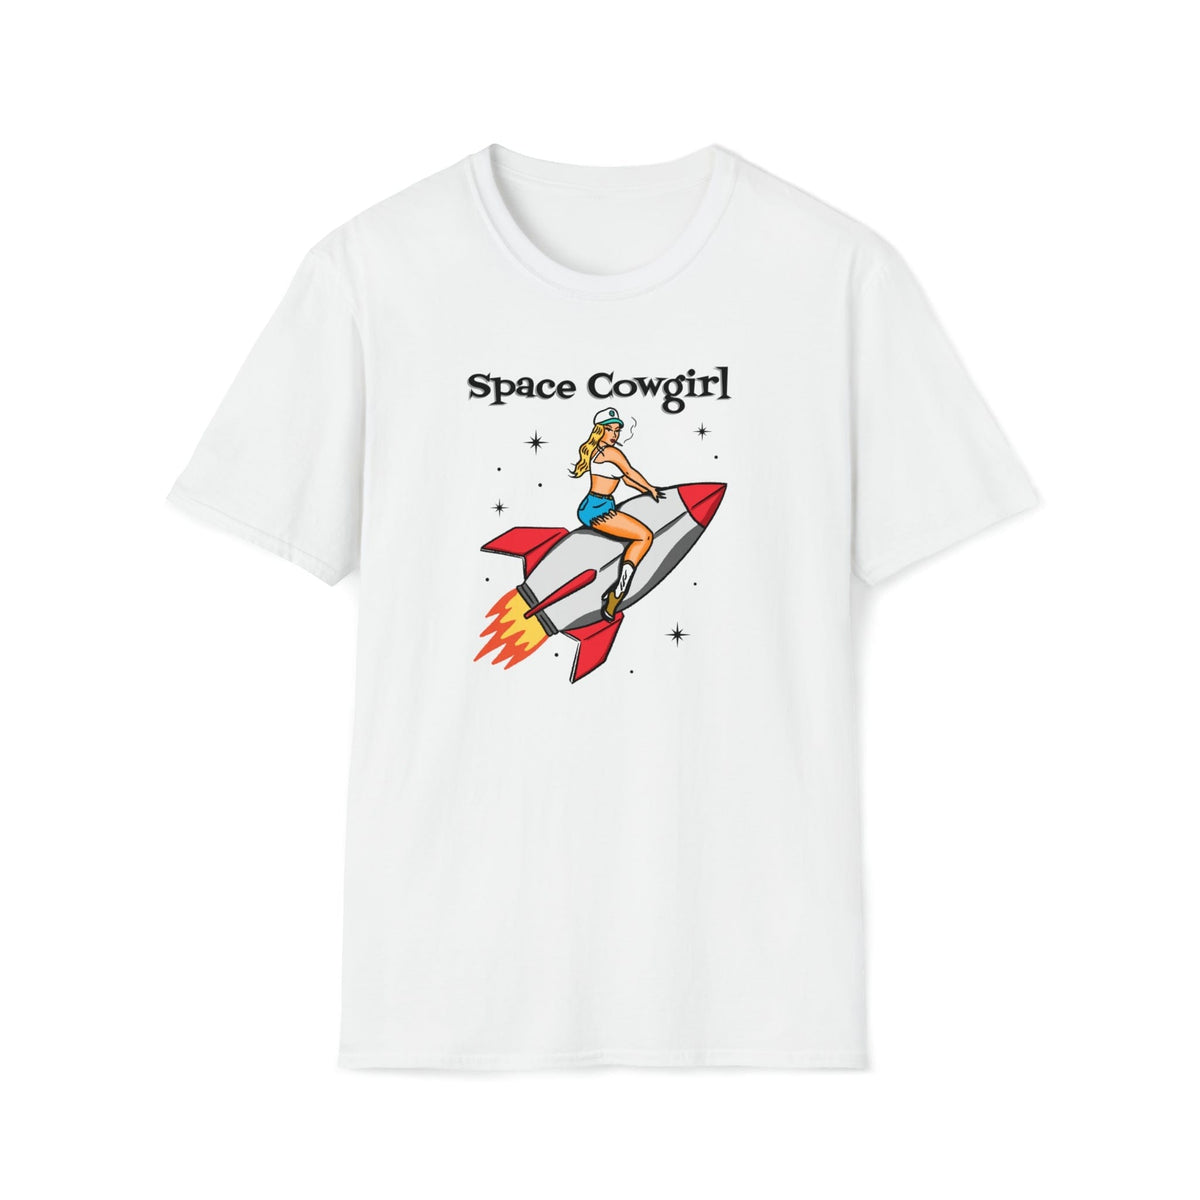 Space Cowgirl Graphic Tee | Country Graphic Tee | Original Artwork by El Ray T-Shirt TheFringeCultureCollective